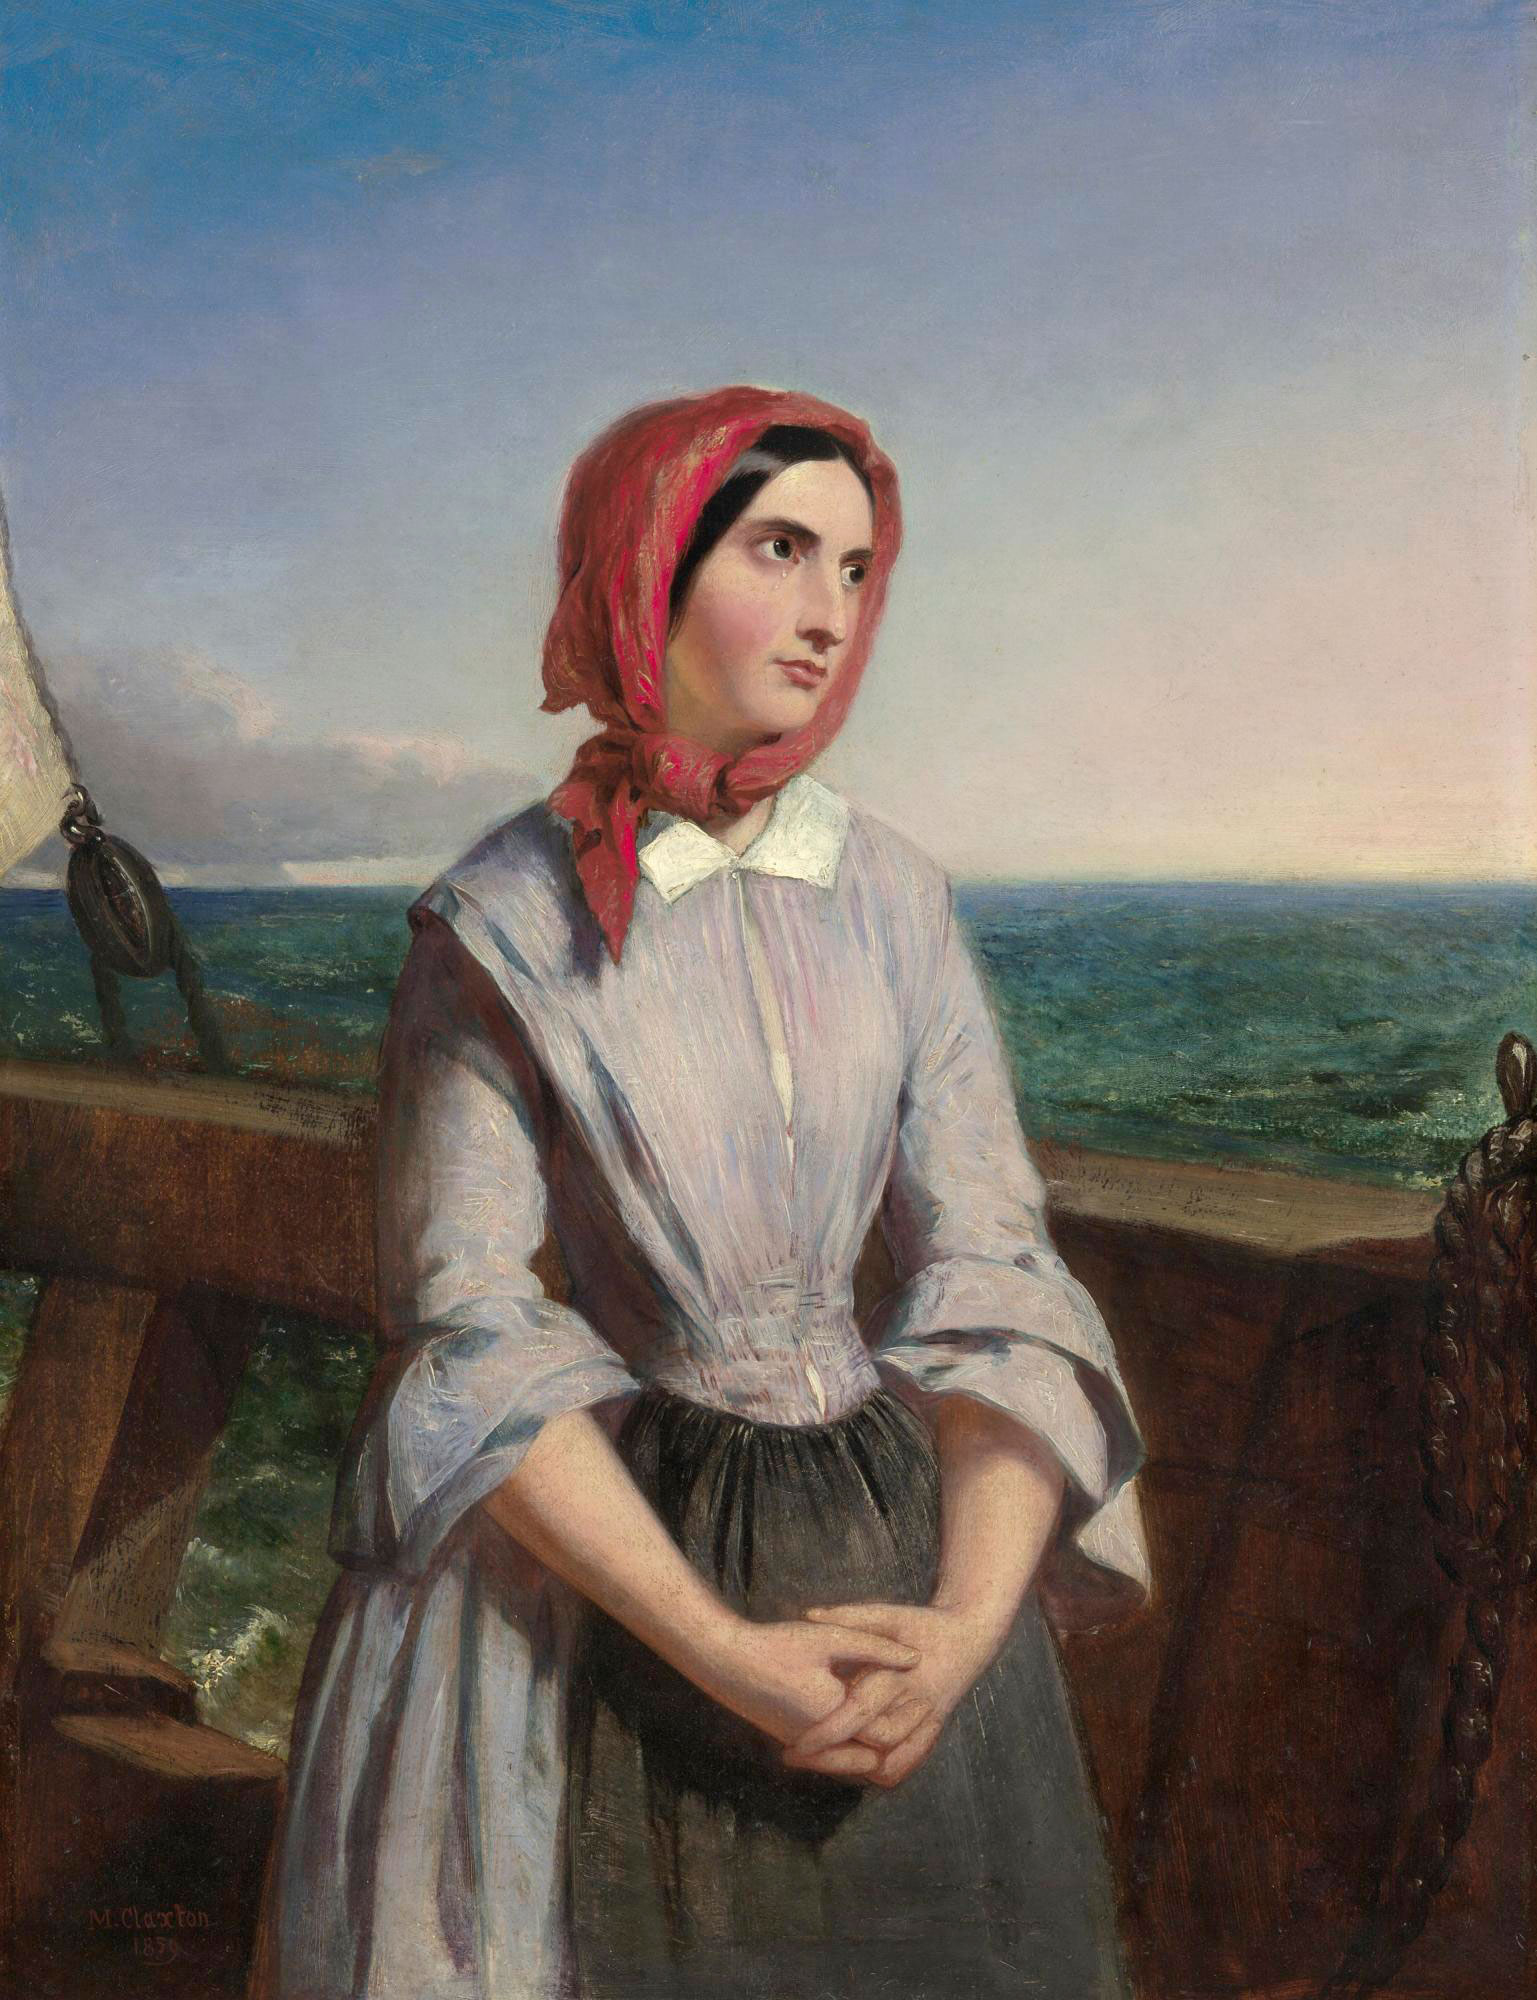 Marshall Claxton, <em>An Emigrant’s Thoughts Of Home </em>(1859), oil on cardboard, 60.7 x 47.0 cm, National Gallery of Victoria, Presented by the National Gallery Women’s Association 1974